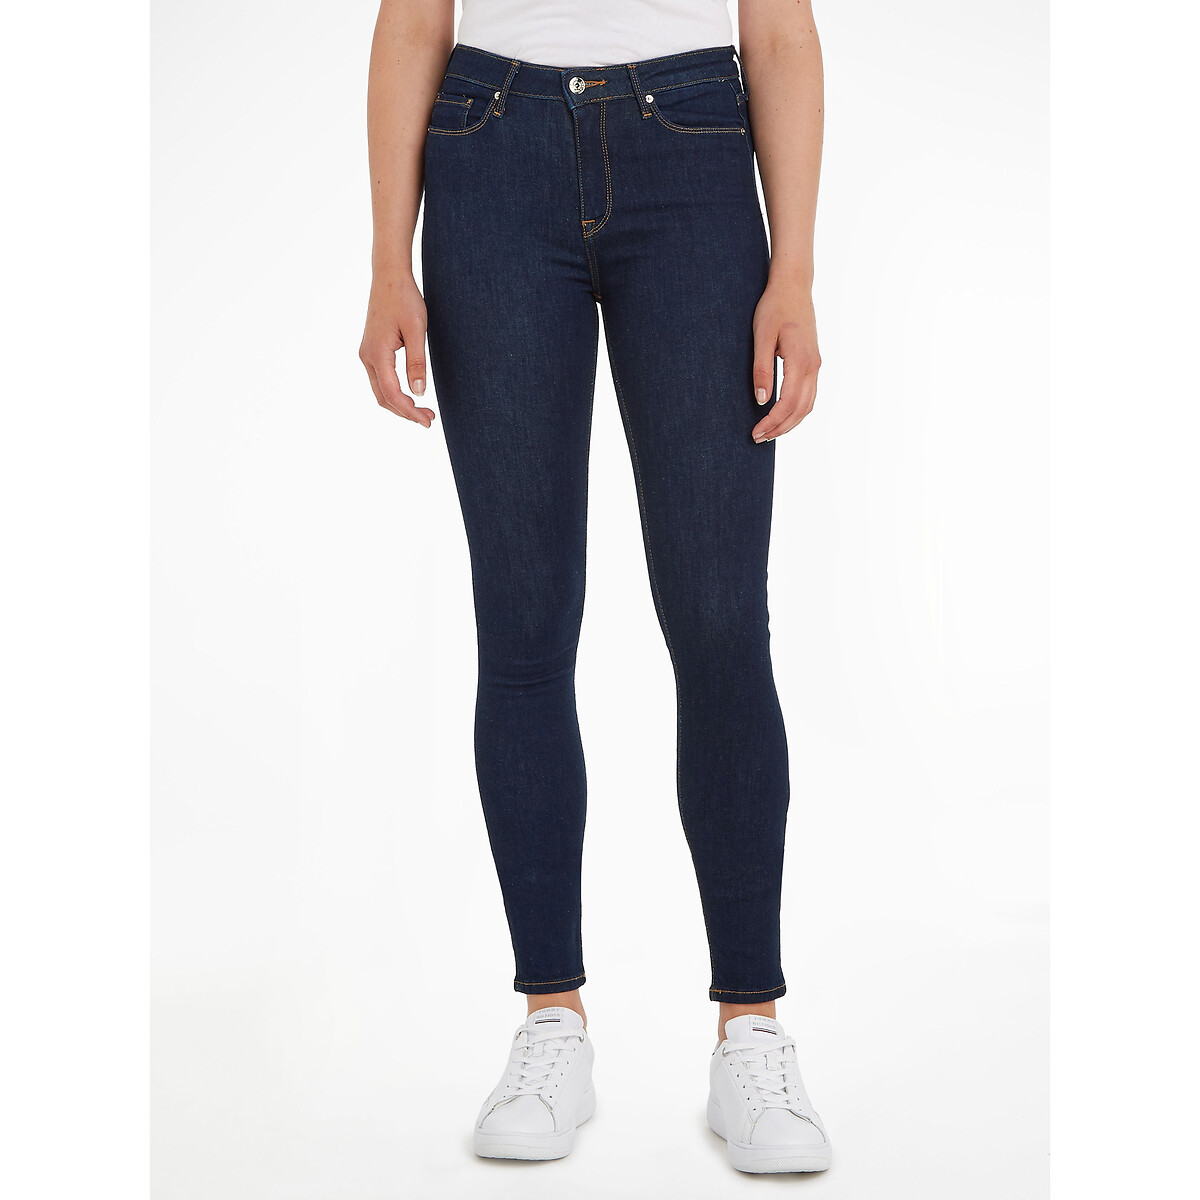 Image of Skinny Jeans, Length 31.5"